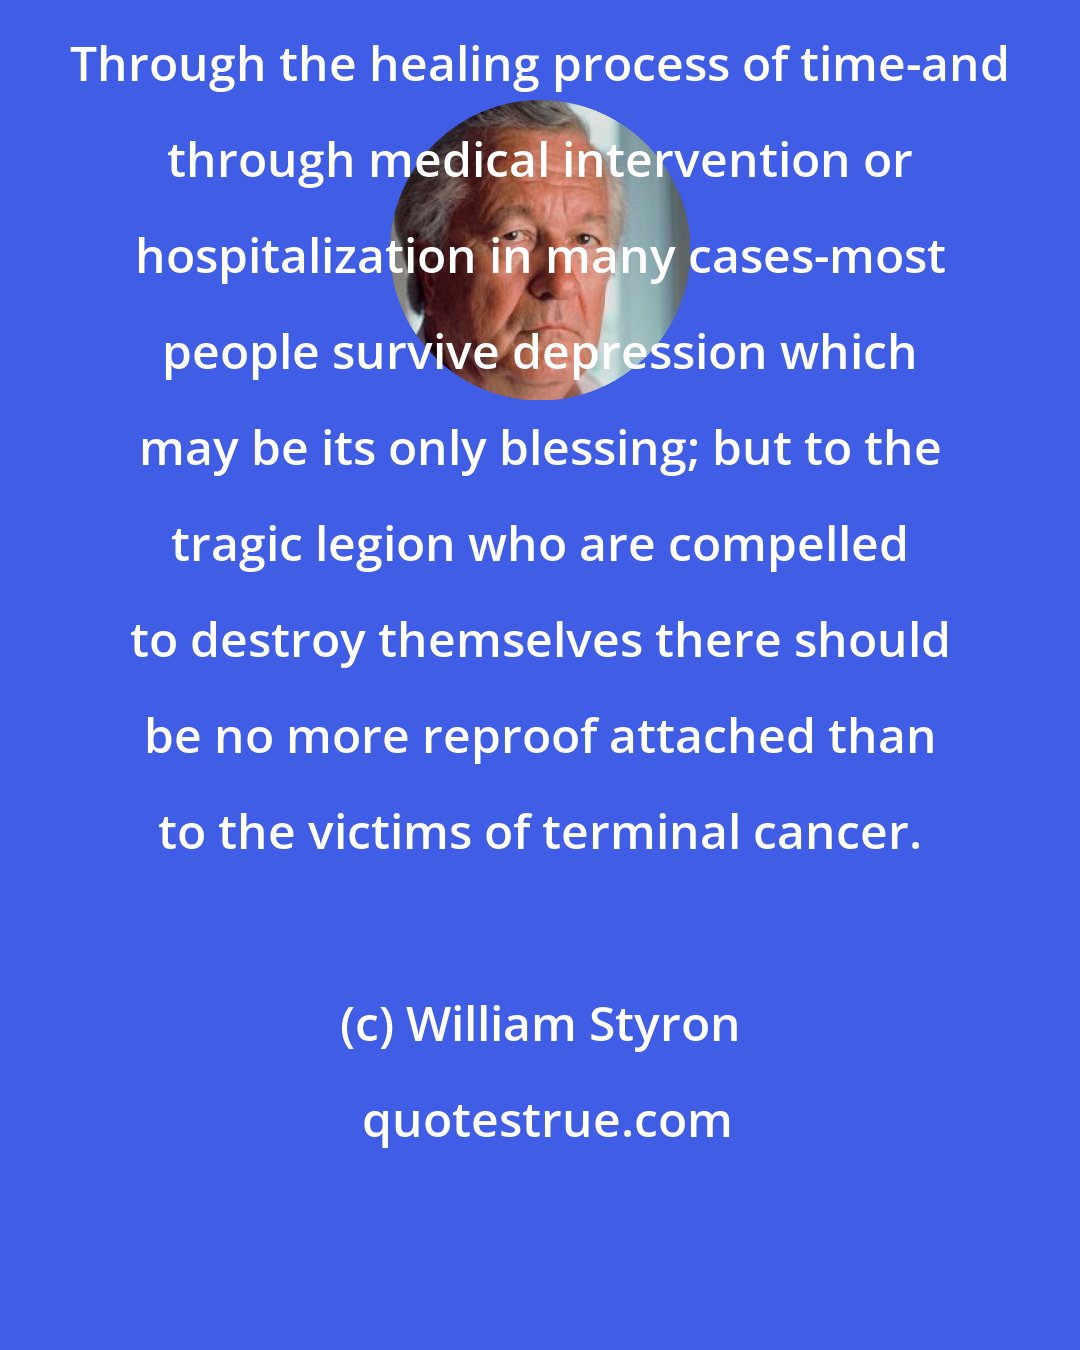 William Styron: Through the healing process of time-and through medical intervention or hospitalization in many cases-most people survive depression which may be its only blessing; but to the tragic legion who are compelled to destroy themselves there should be no more reproof attached than to the victims of terminal cancer.